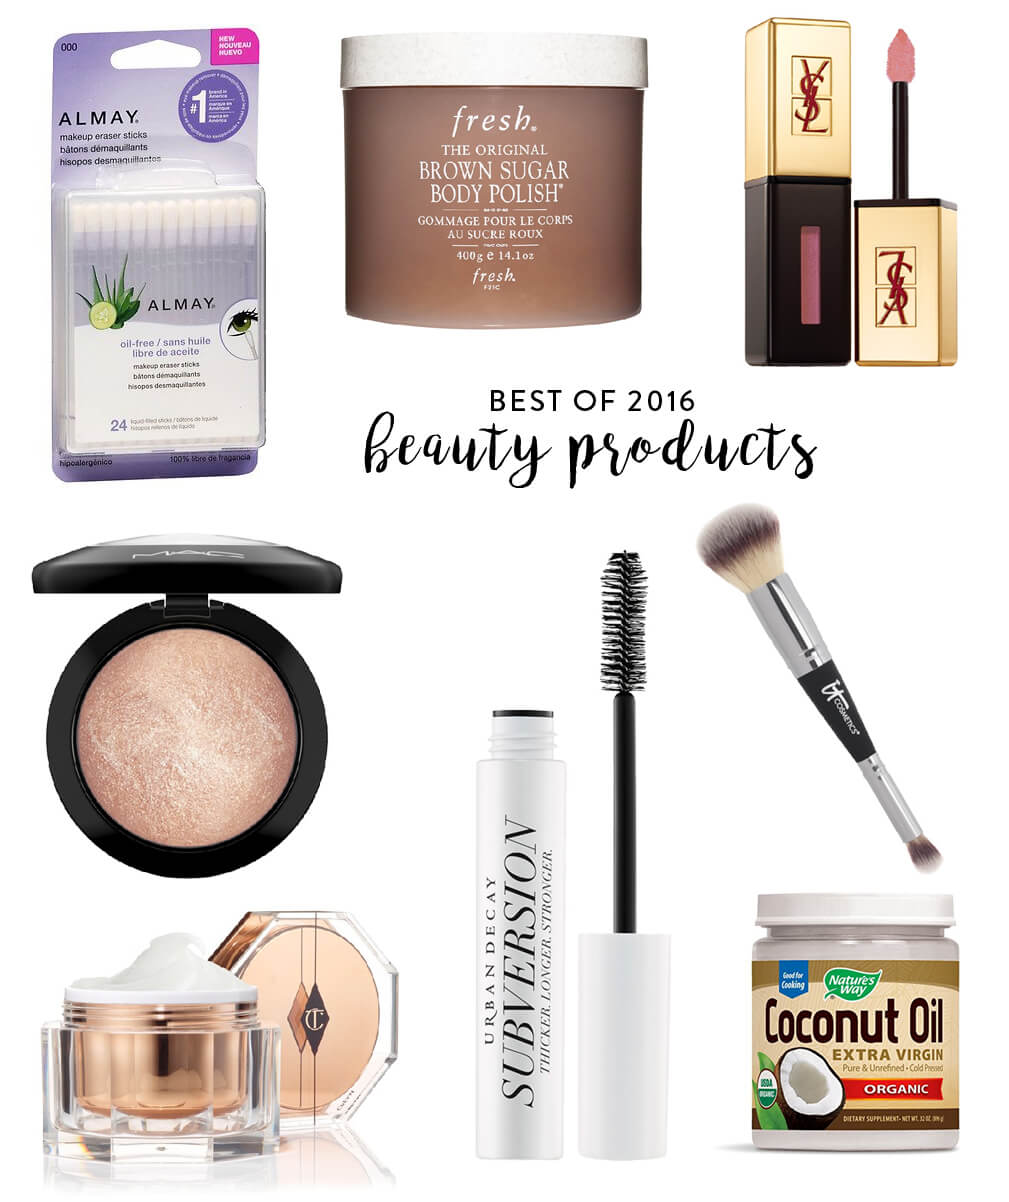 best purchases of 2016 - beauty and makeup products